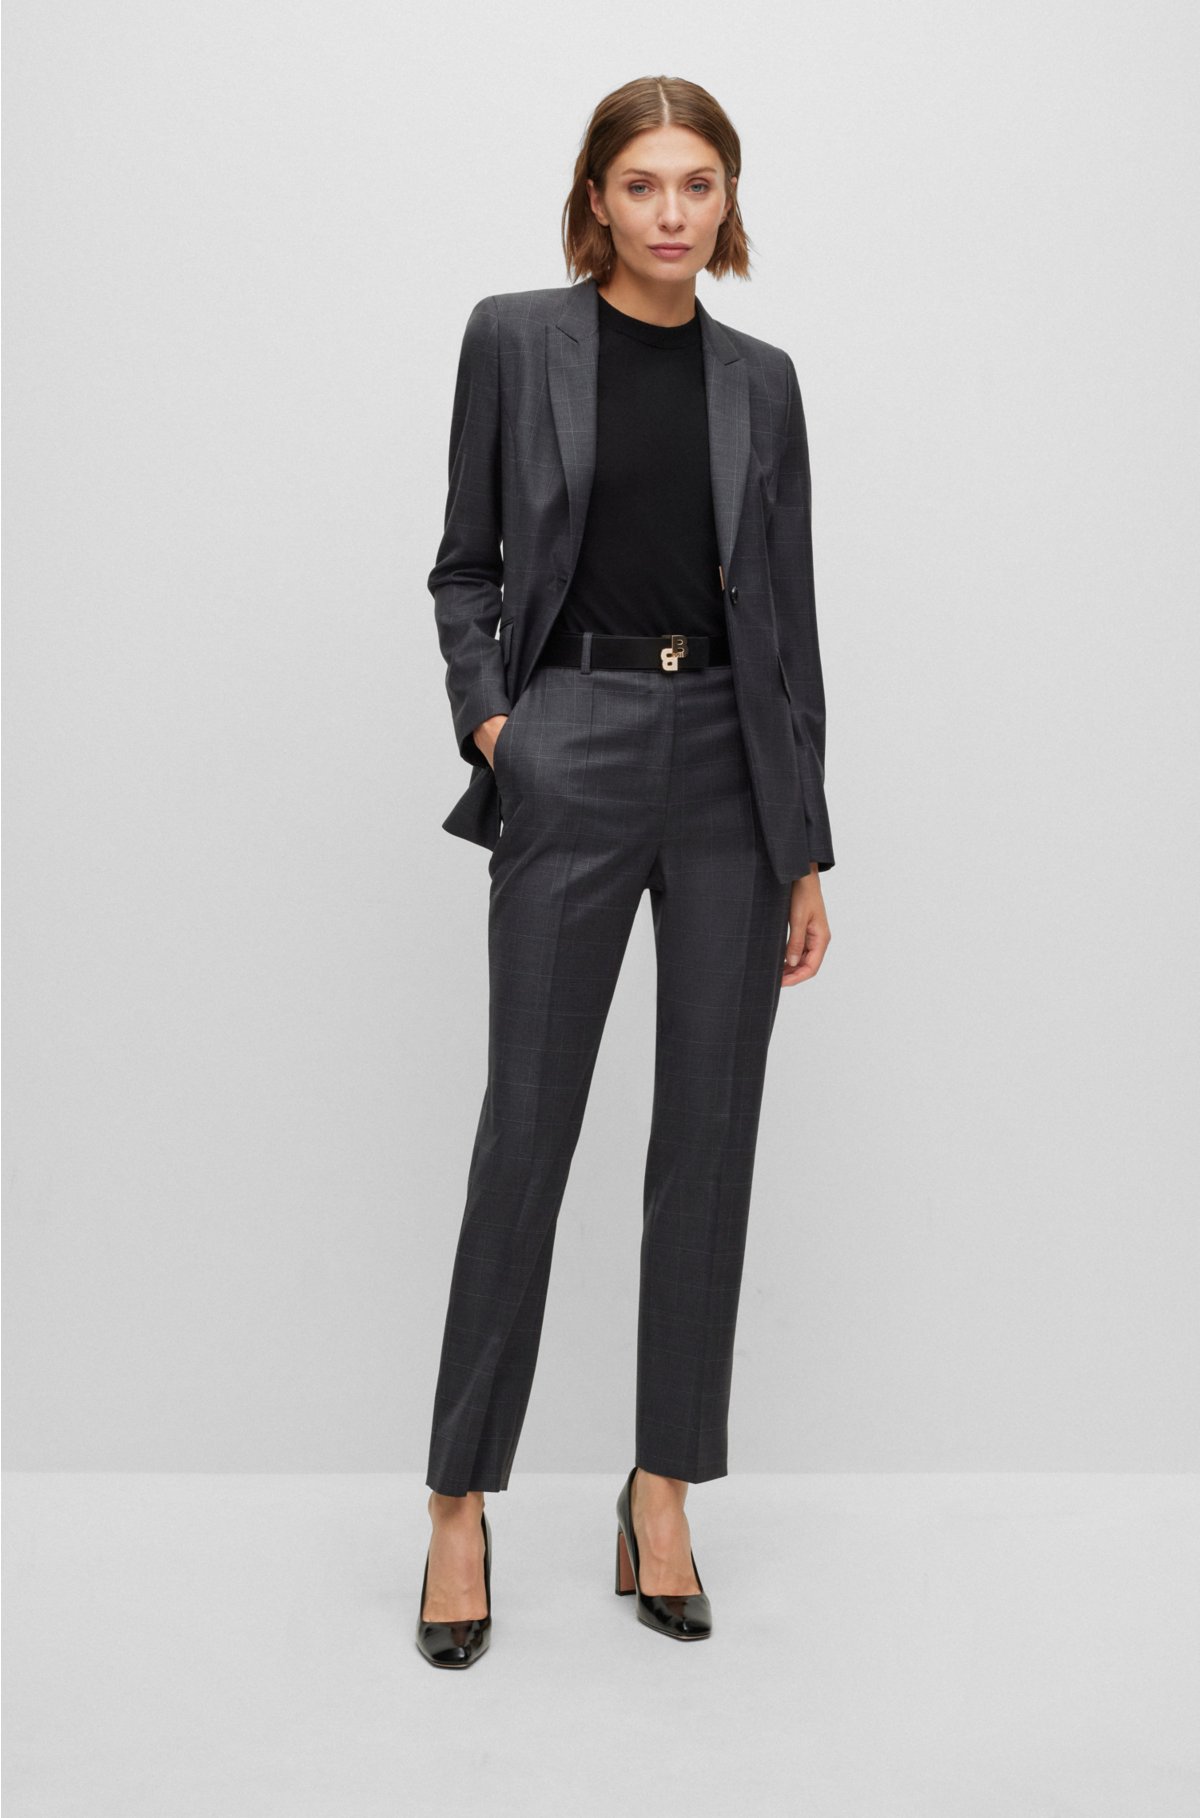 Jacket Style Straight / Trouser Suits: Buy Jacket Style Straight